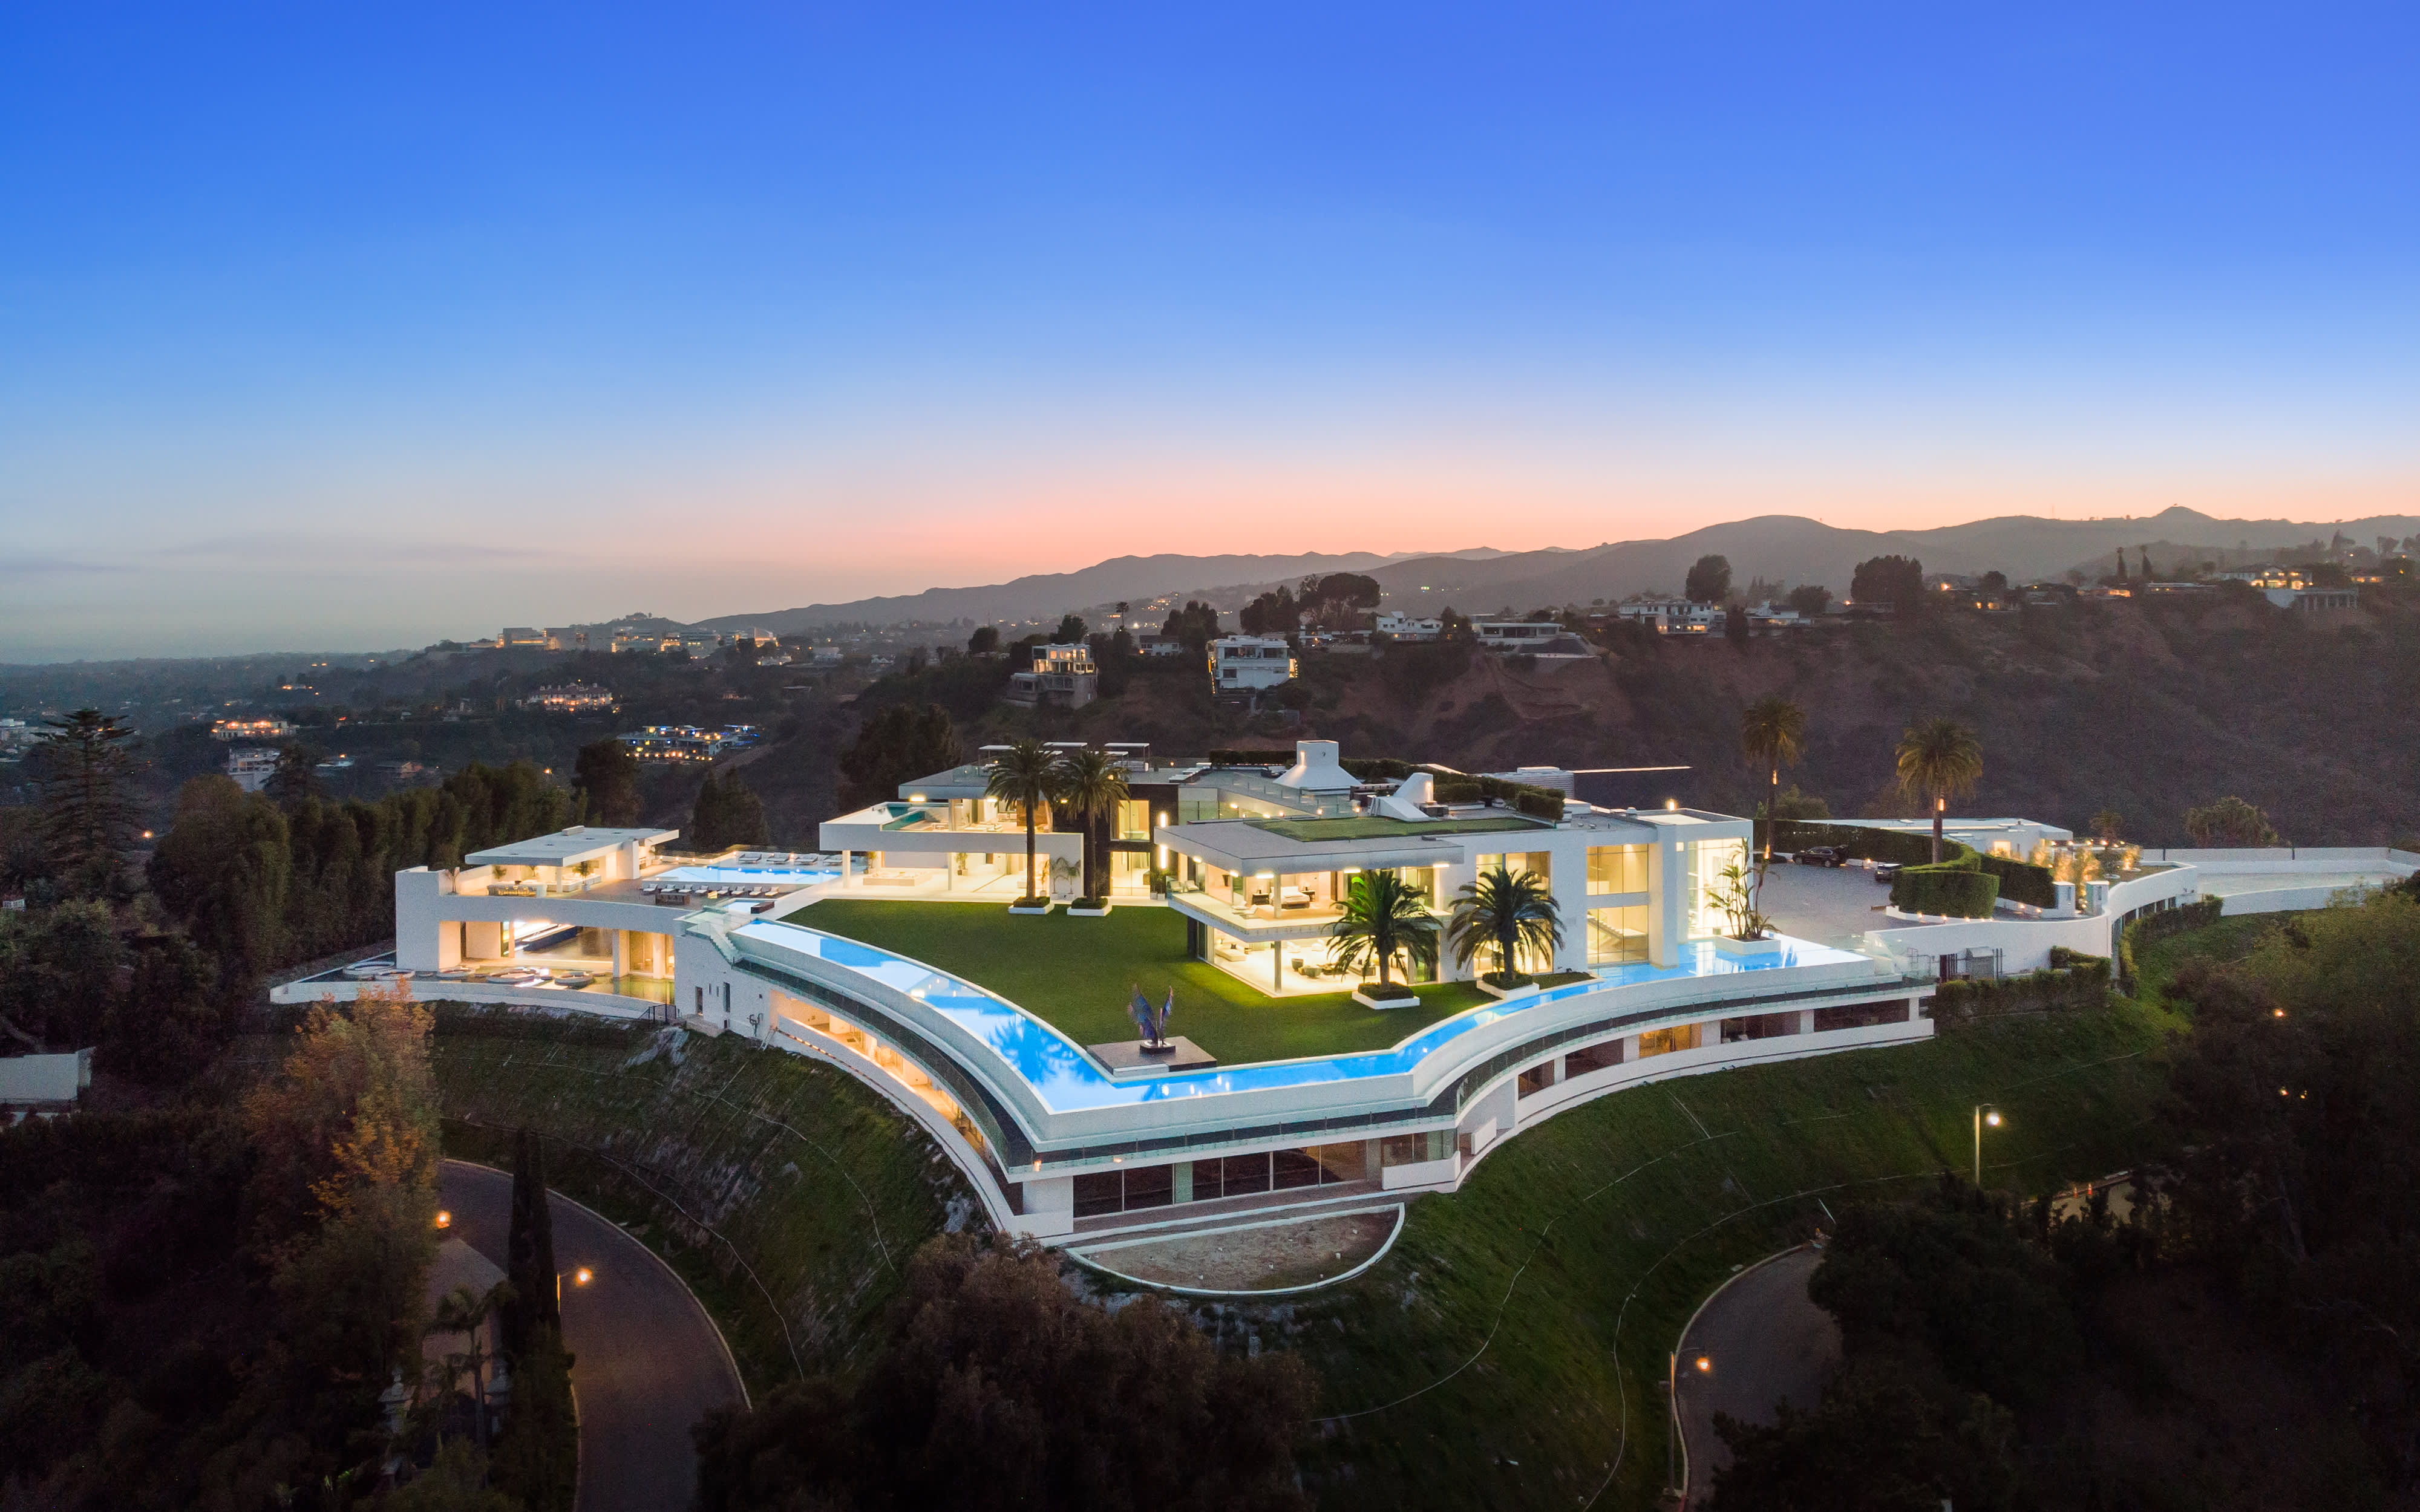 Tour the 295 million mansion known as "The One"